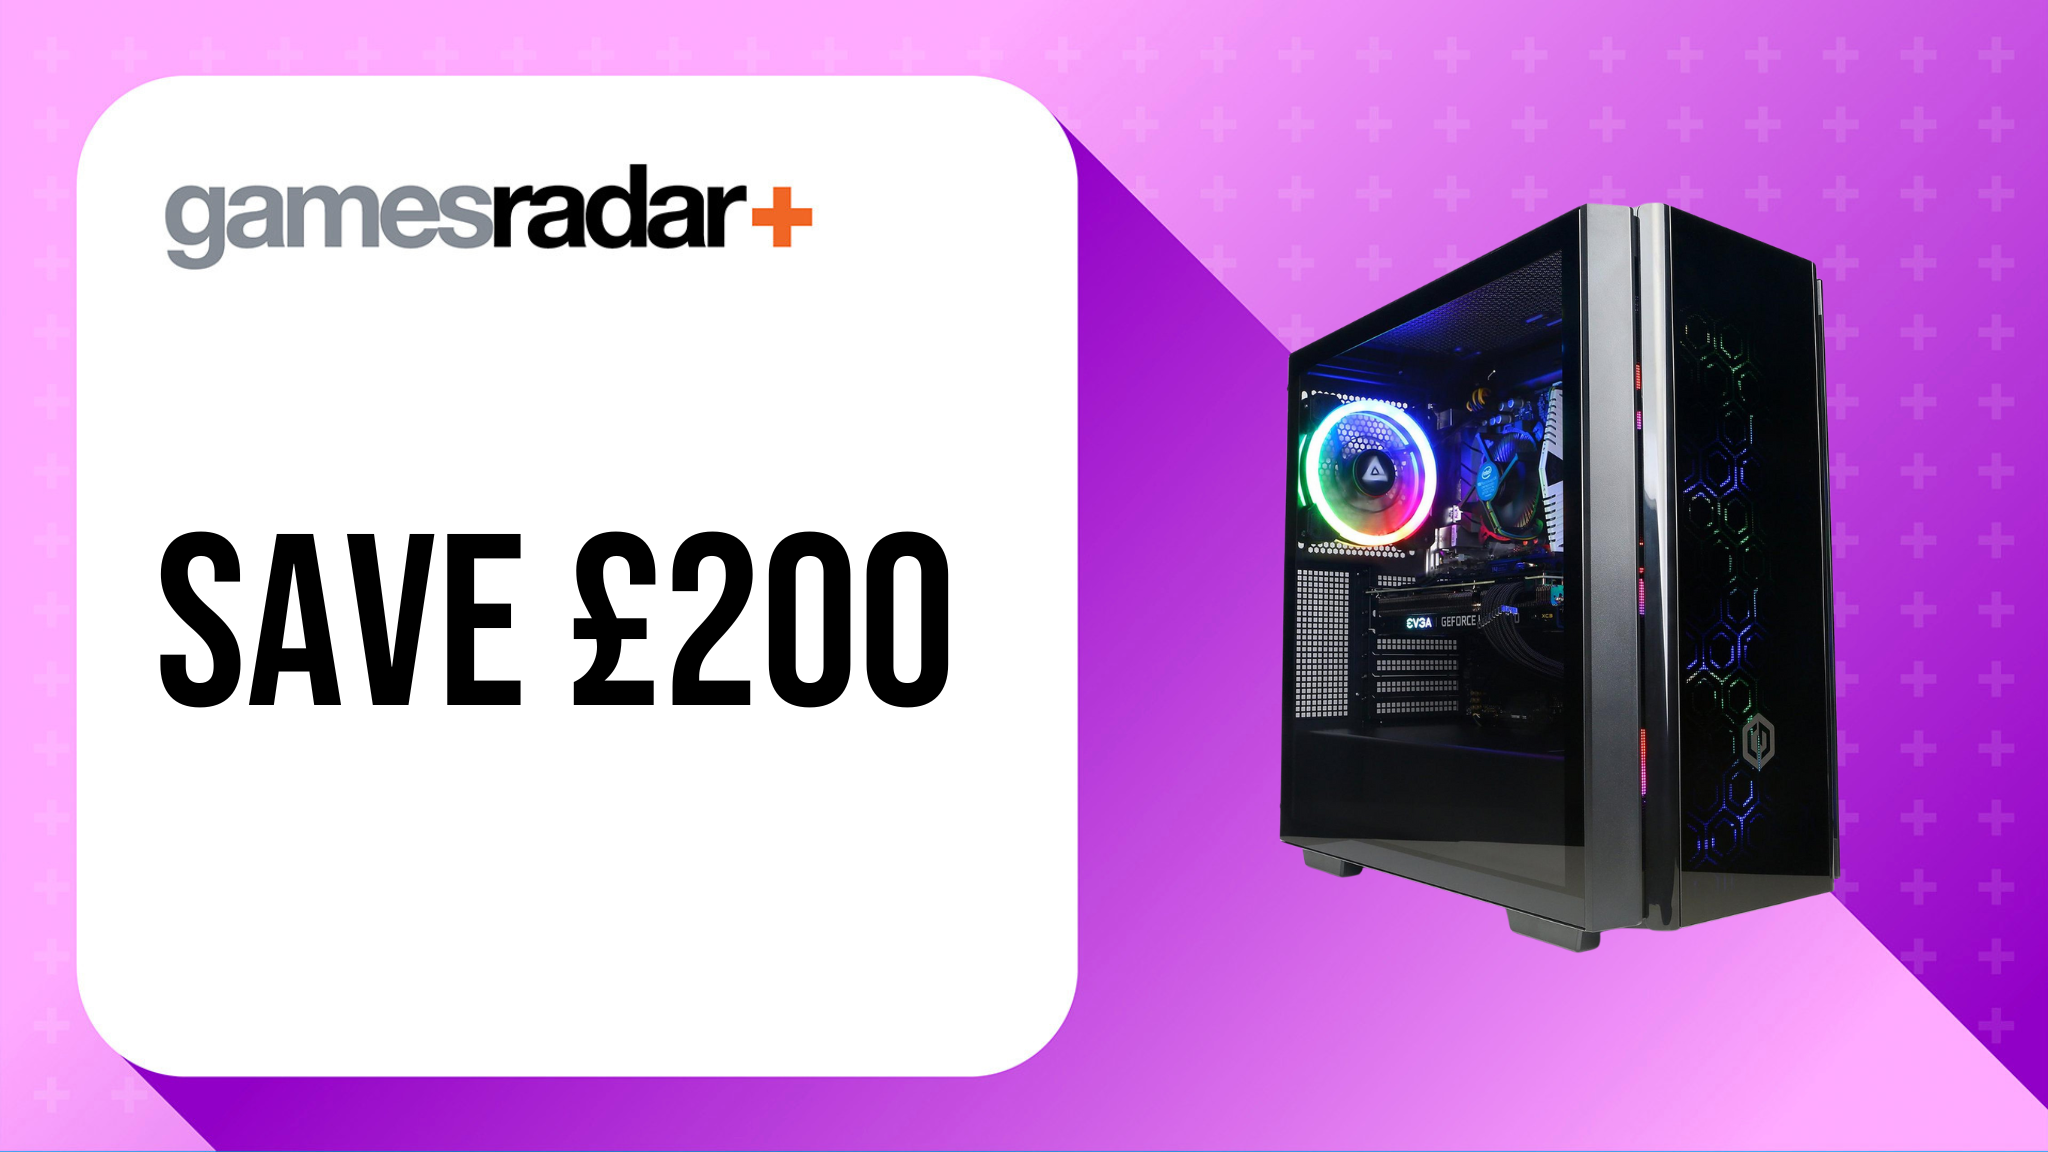 Bifrost gaming PC deal image with £200 saving stamp and purple background